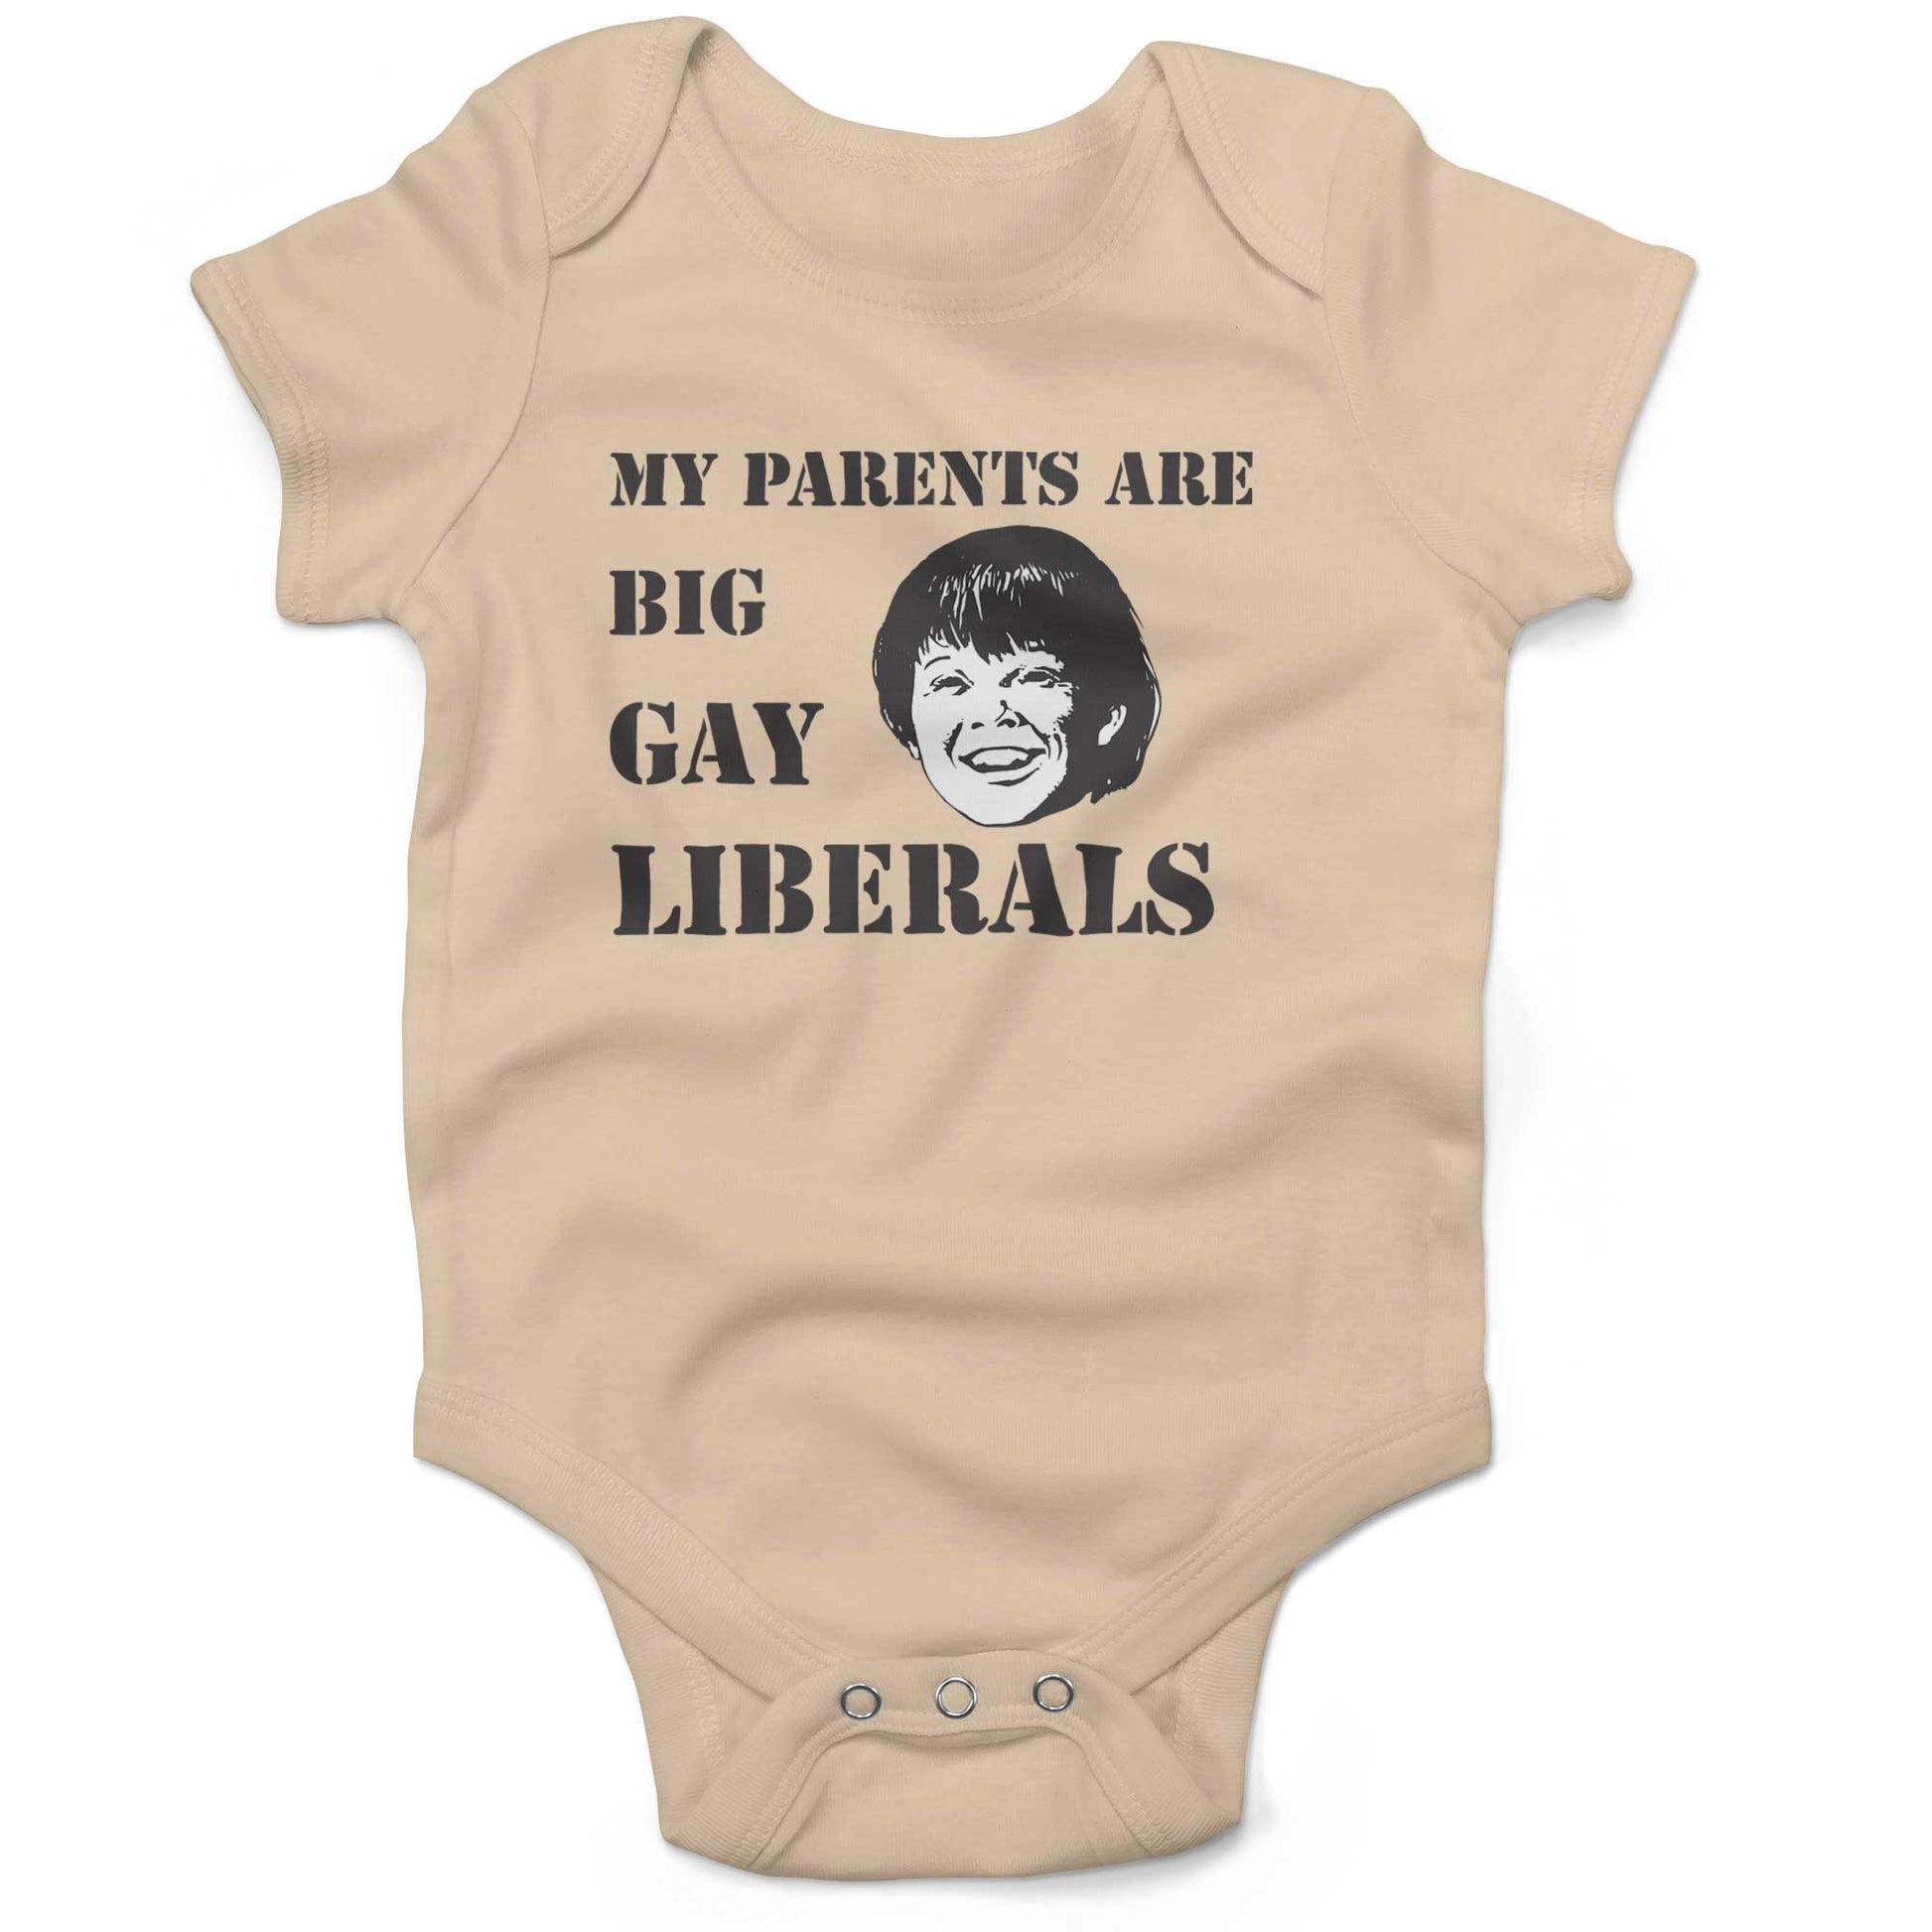 My Parents Are Big, Gay Liberals Infant Bodysuit or Raglan Baby Tee-Organic Natural-3-6 months